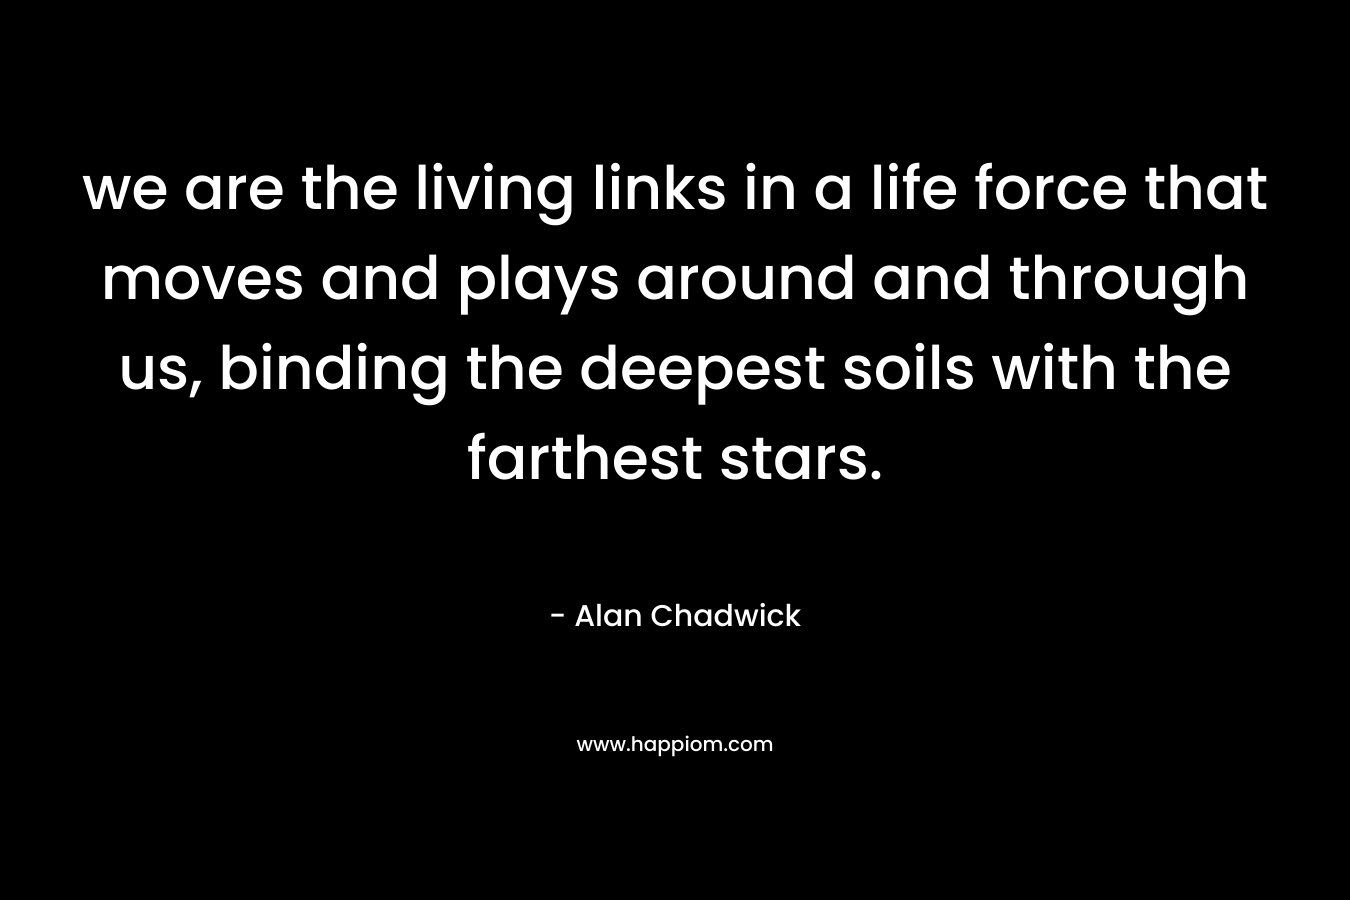 we are the living links in a life force that moves and plays around and through us, binding the deepest soils with the farthest stars.